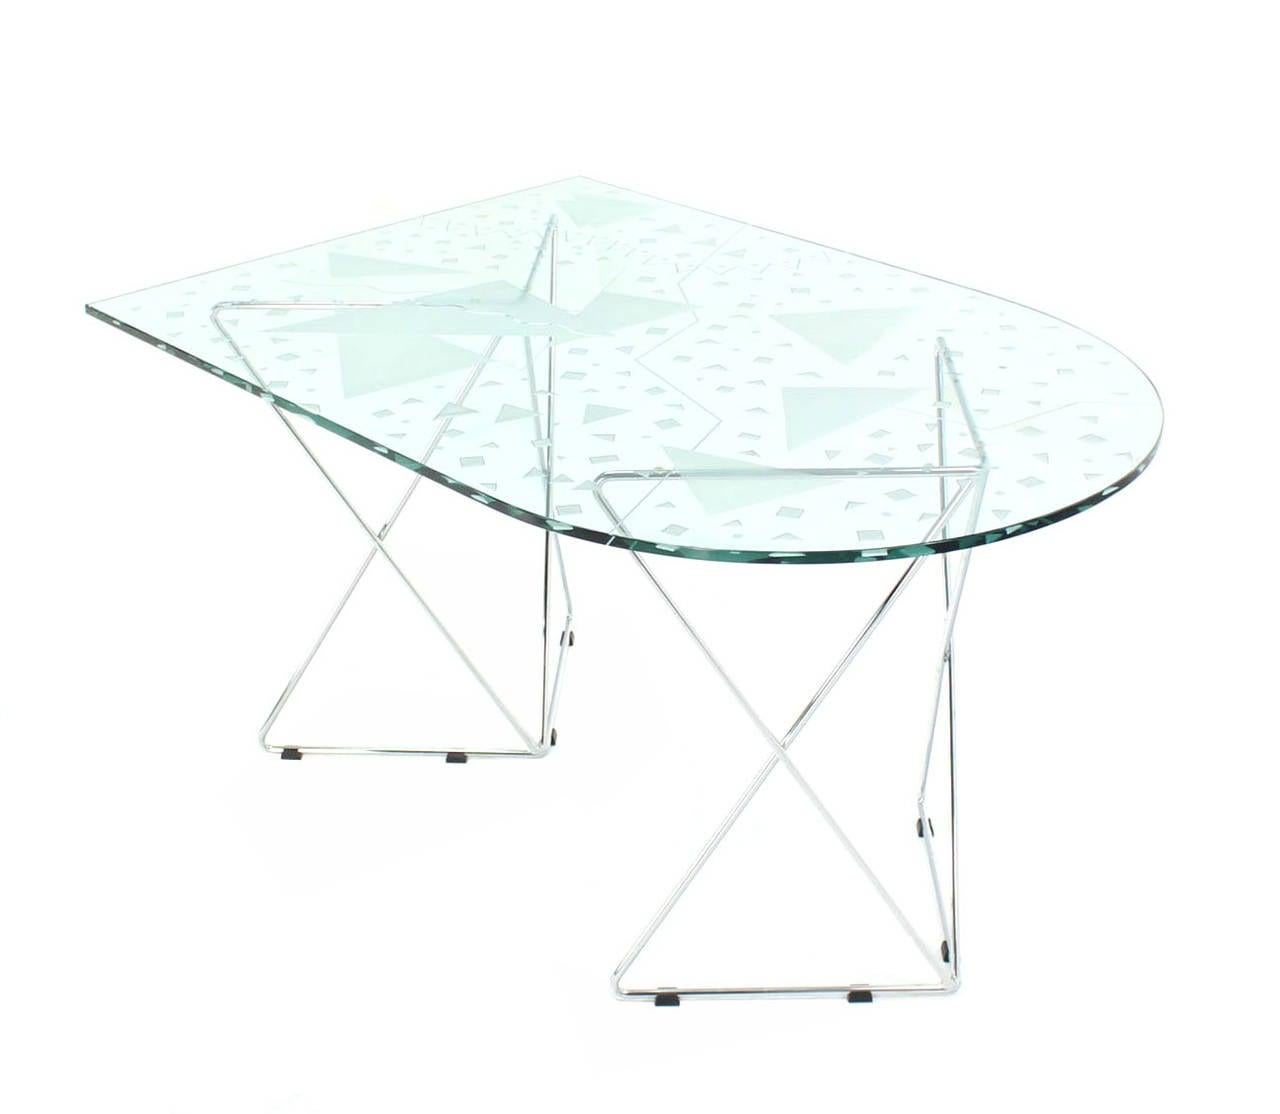 Pattern Etched Top Art Glass Dining Table with Chrome Wire Base Artist Signed MINT!
Oval and square flat iron shape glass top.